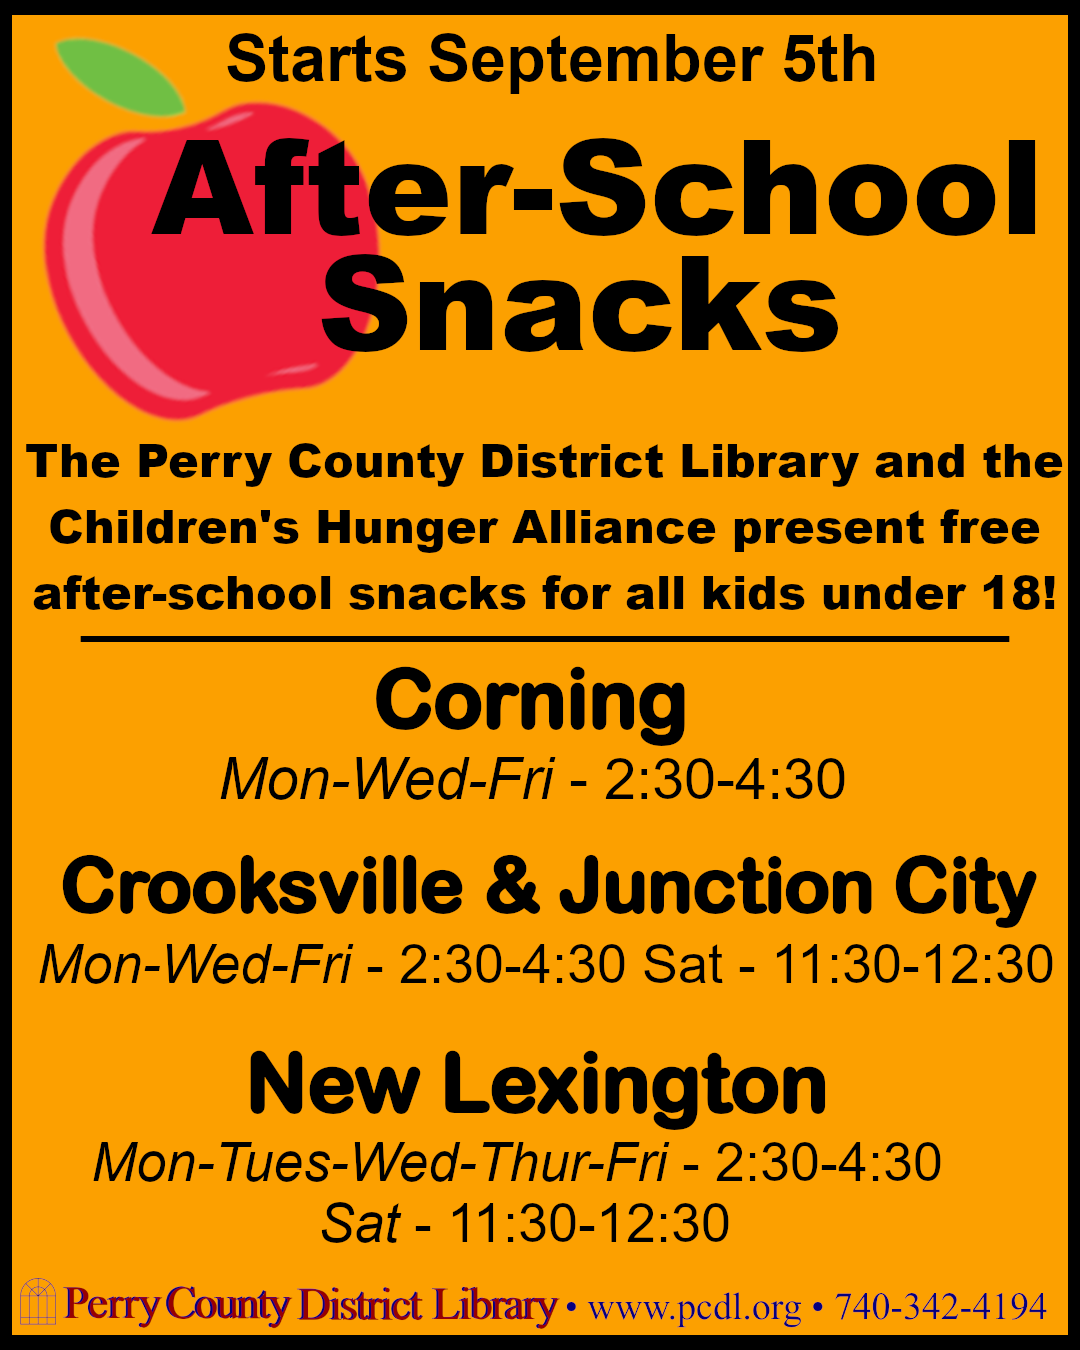 Corning snacks, Monday Wednesday Friday 2:30PM-4:30PM; Crooksville and Junction City snacks Monday Wednesday and Friday 2:30PM-430PM, and Saturday 11:30AM-12:30PM; New Lexington snacks Monday through Friday 2:30PM-4:30PM & Saturday 11:30AM-12:30 PM